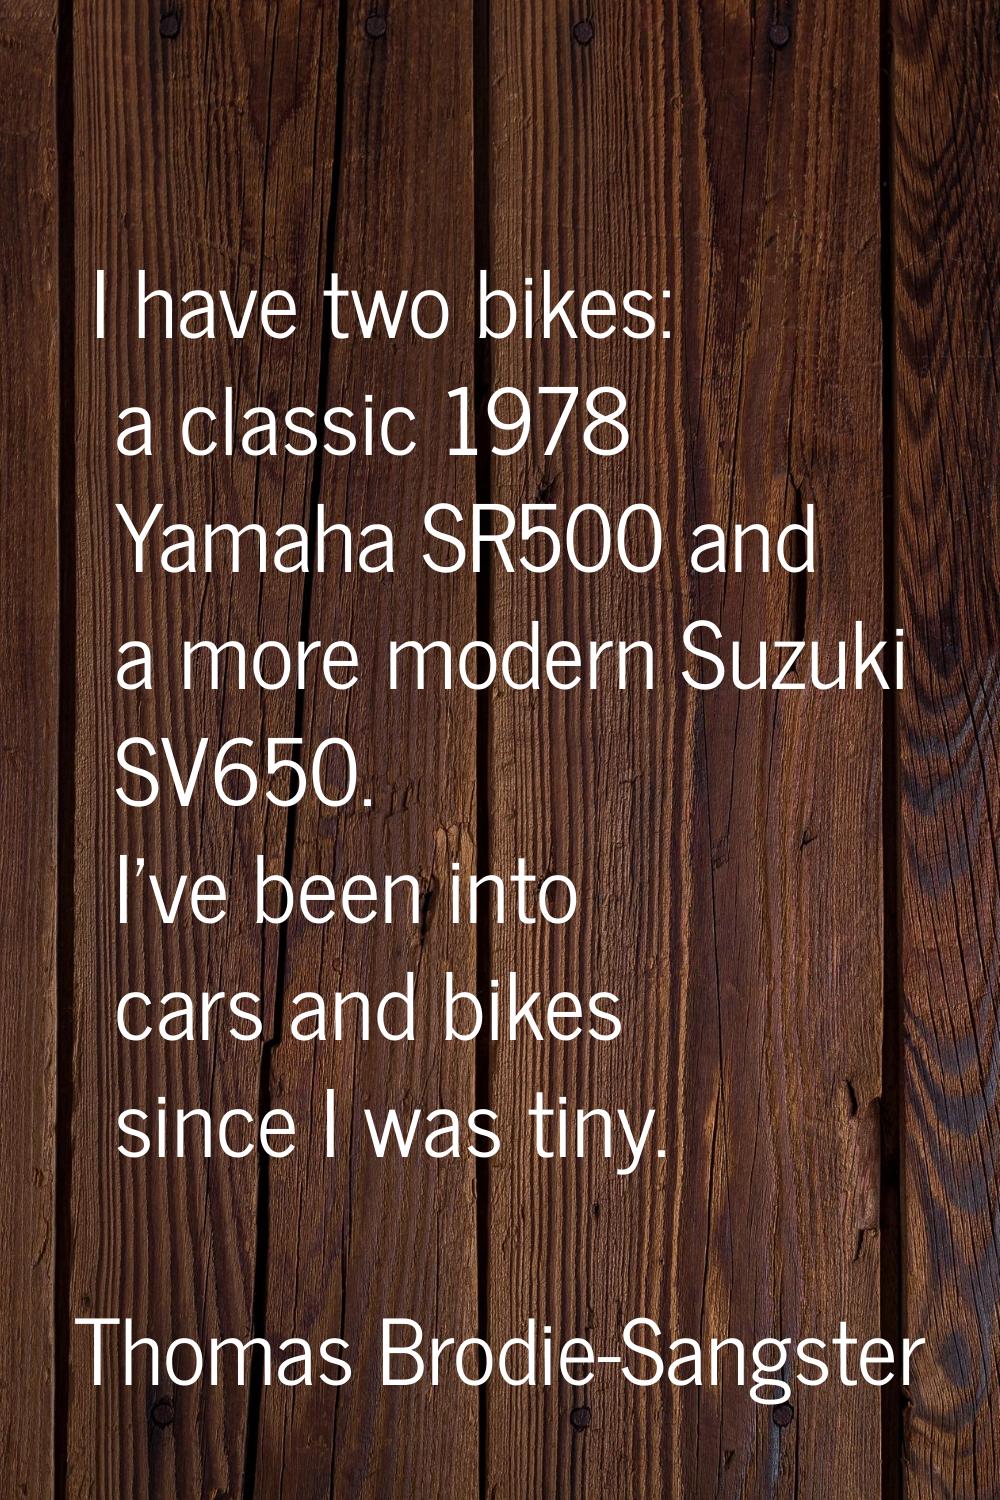 I have two bikes: a classic 1978 Yamaha SR500 and a more modern Suzuki SV650. I've been into cars a